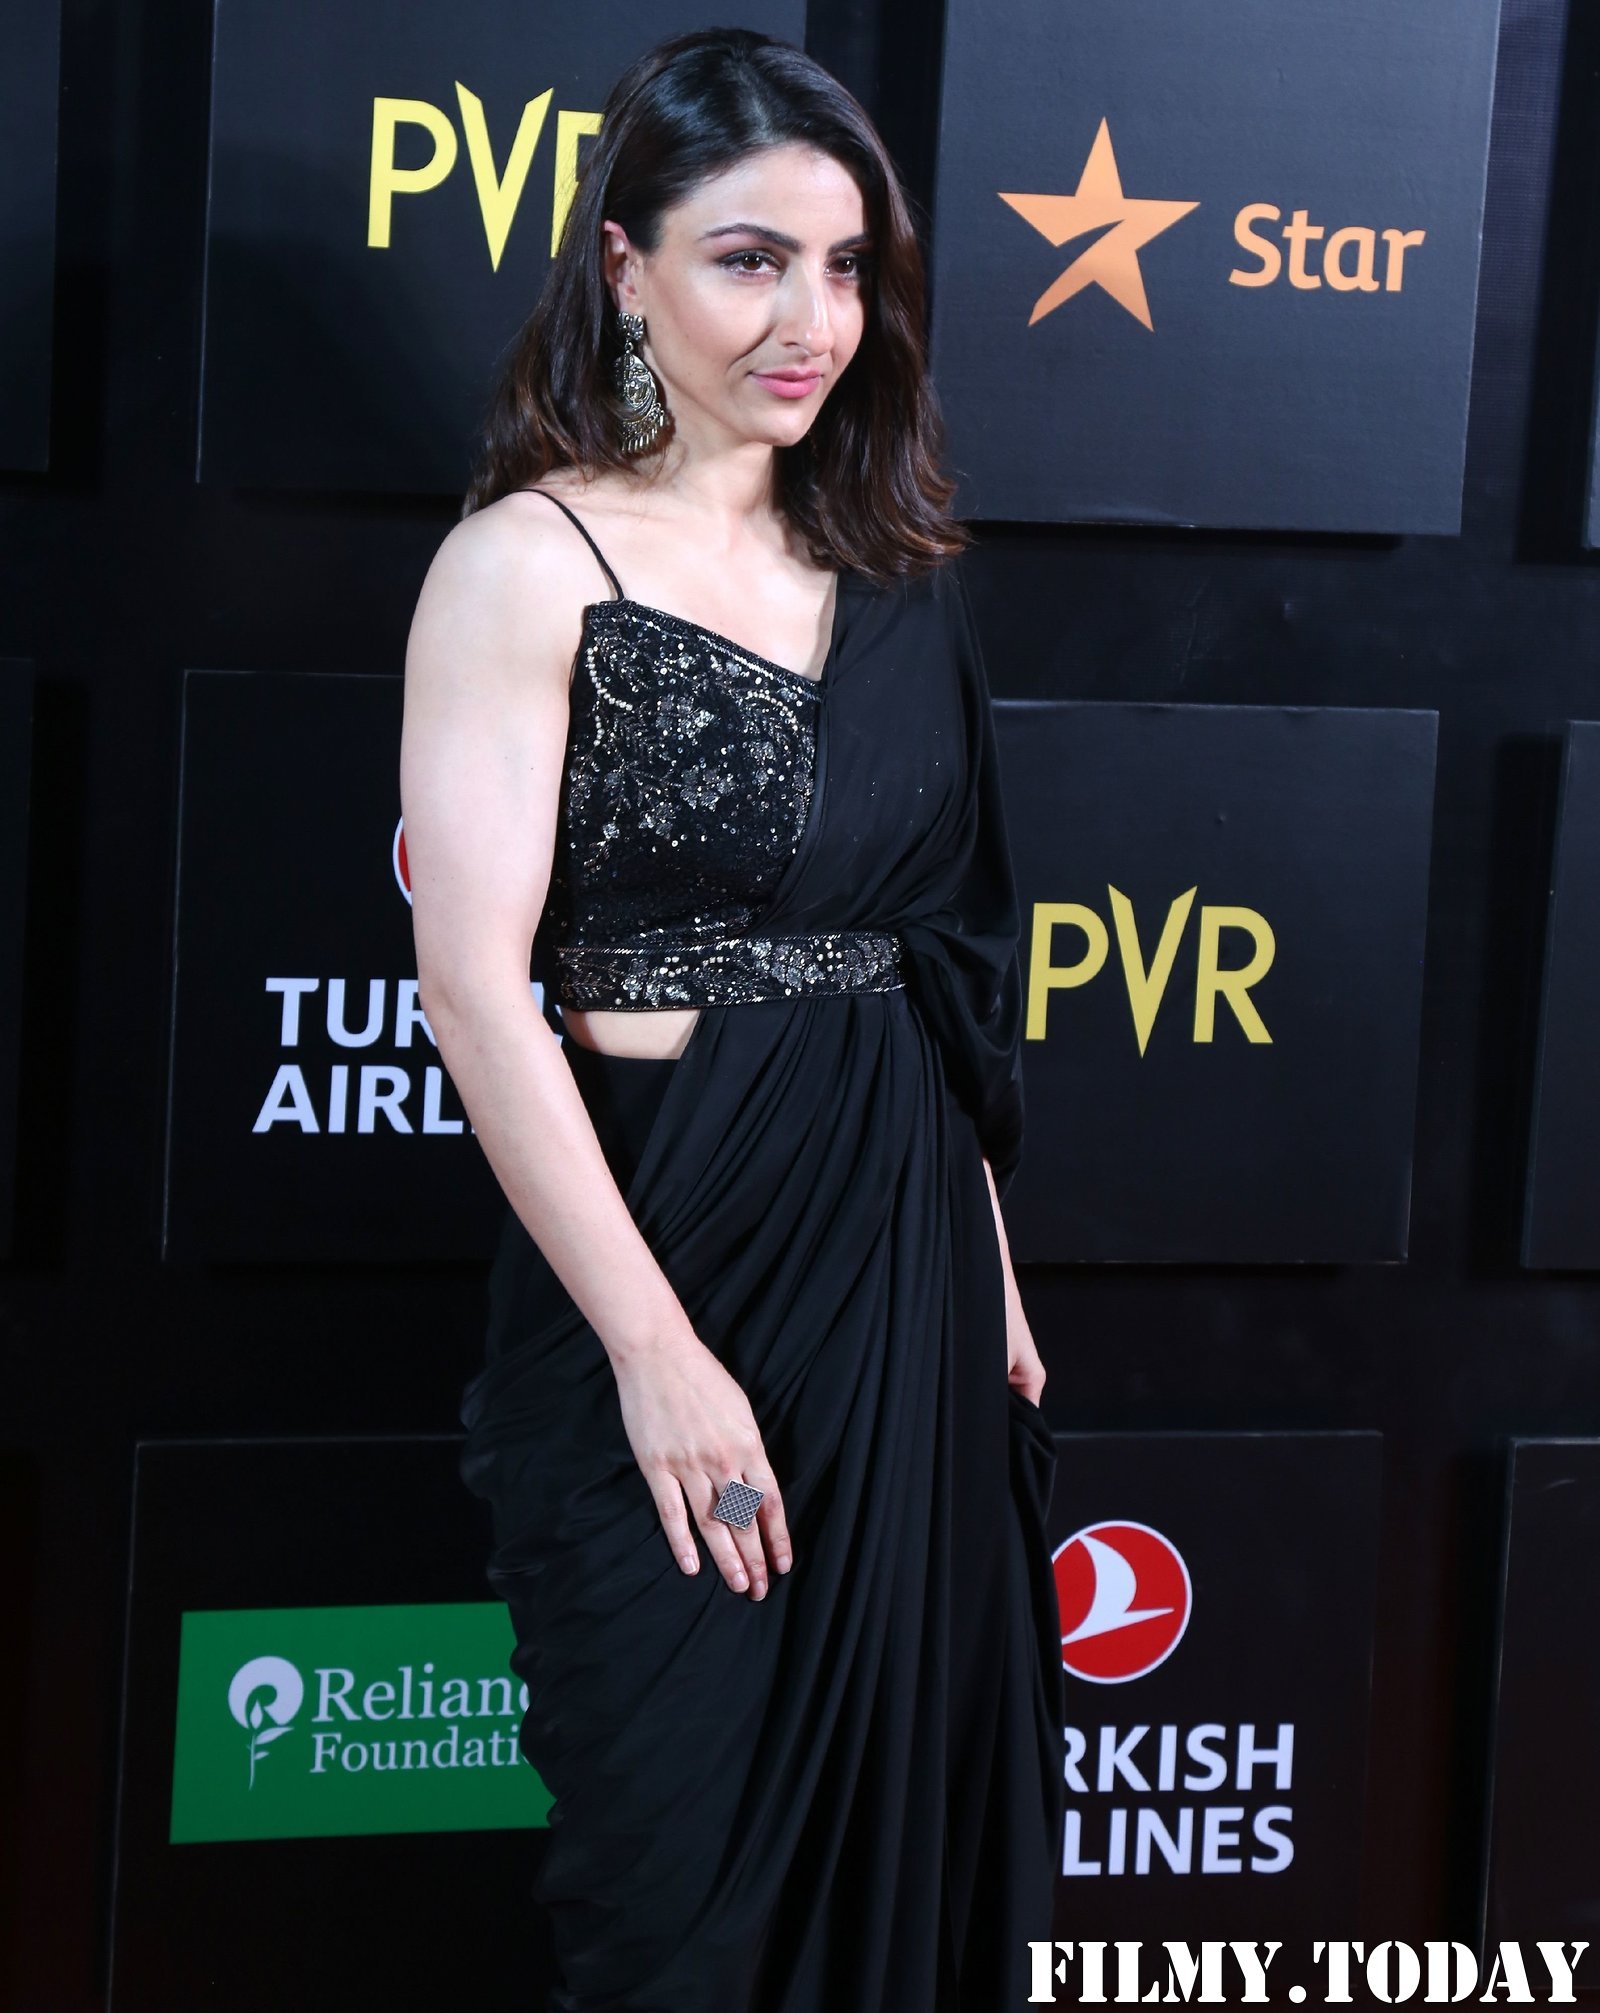 Soha Ali Khan - Photos: Celebs At Opening Ceremony Of Mami Film Festival 2019 | Picture 1692645